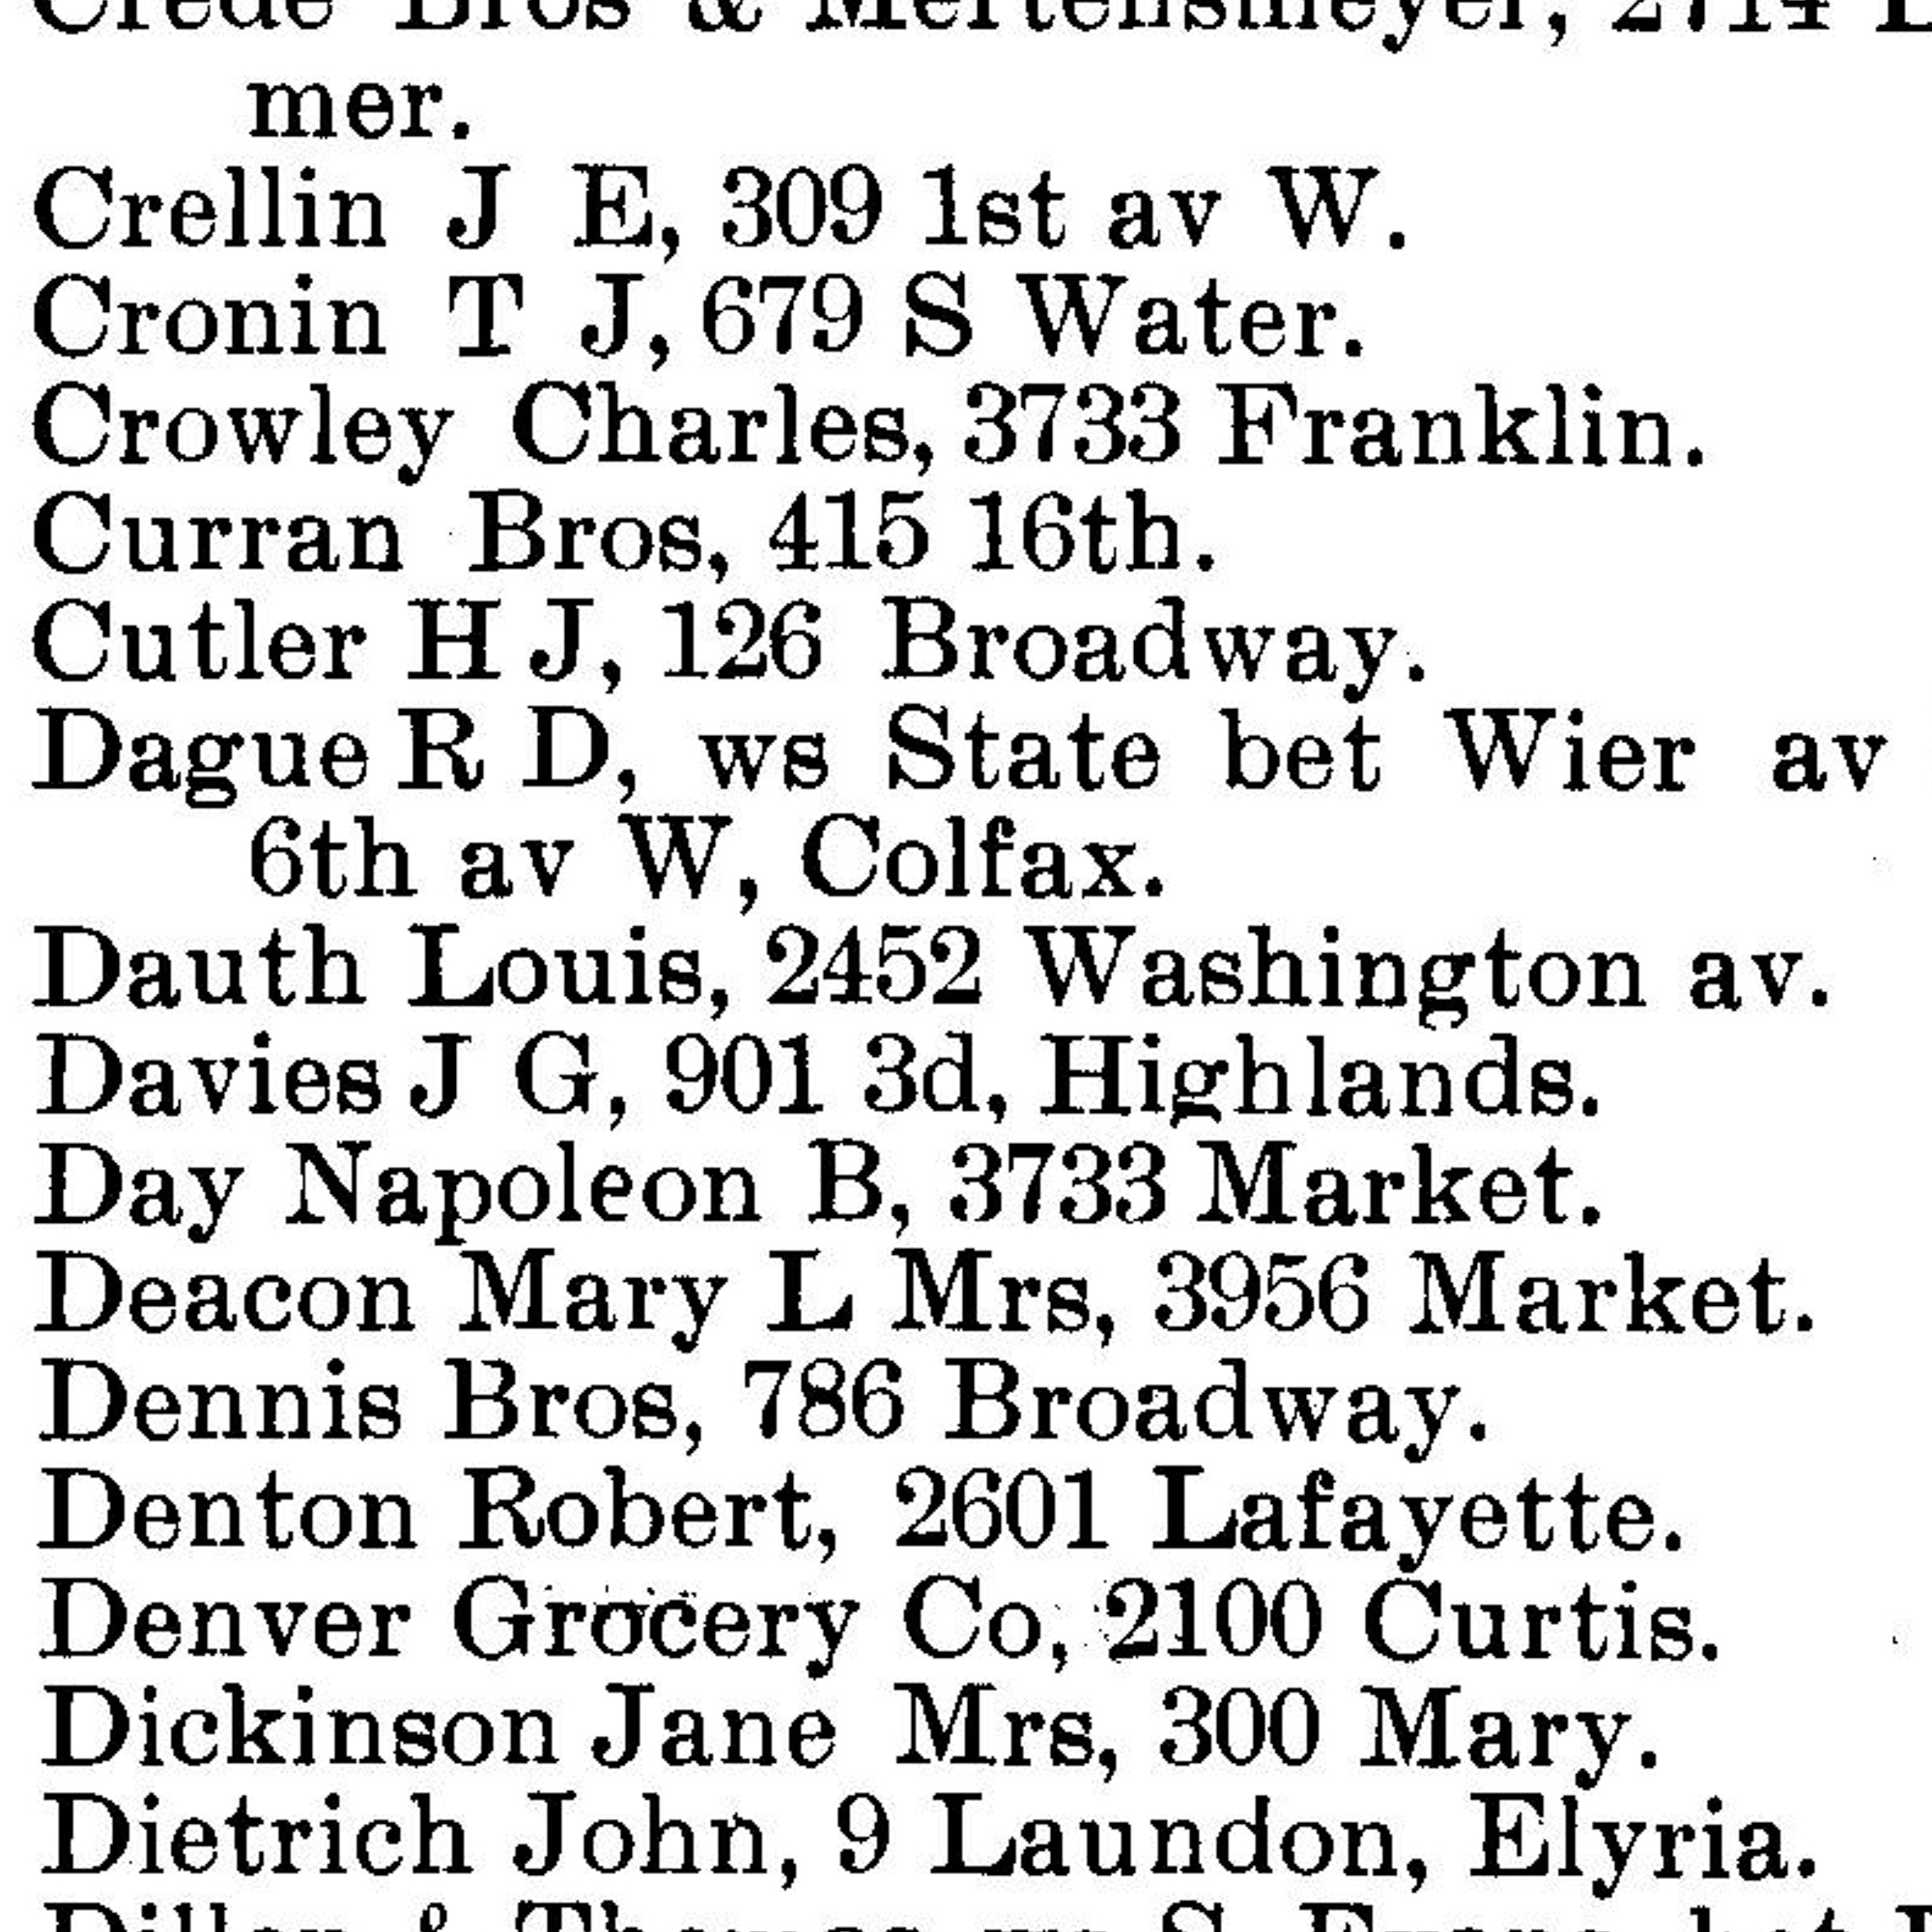 Dauth Family Archive - 1896 - Denver Directory - Entry For Louis Dauth